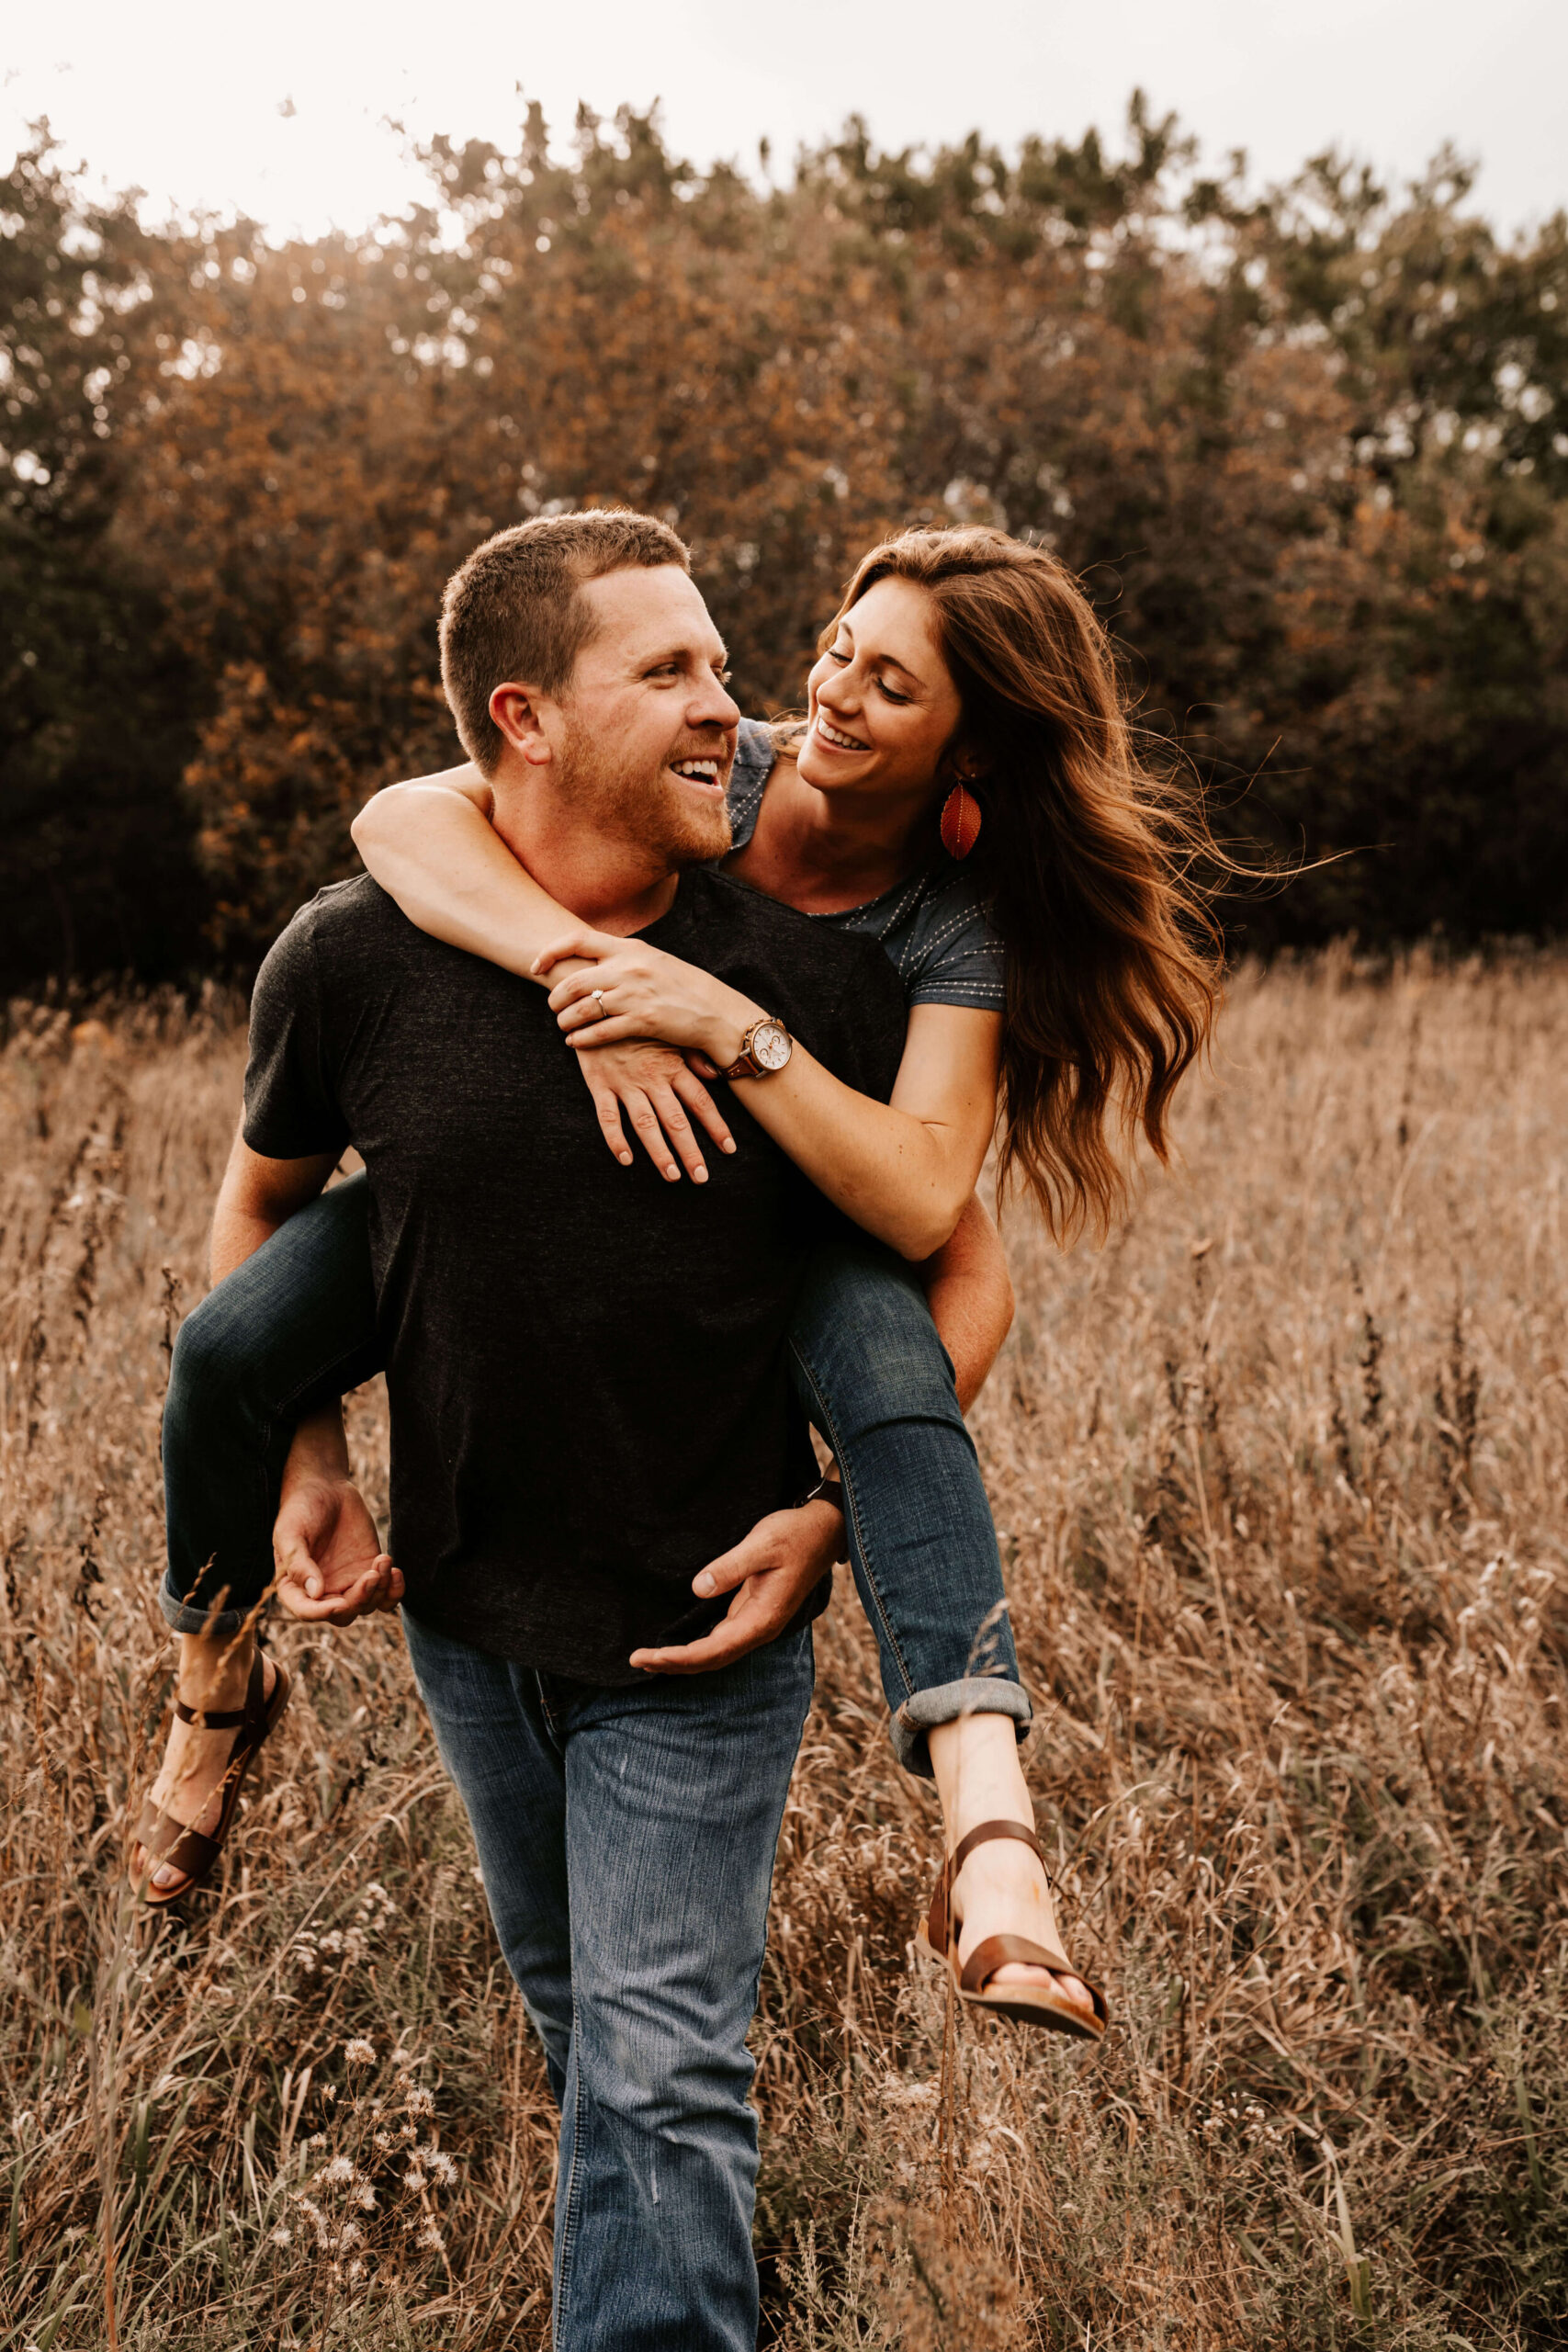 Molly + Dylan - Woodsy Kansas Fall Engagement